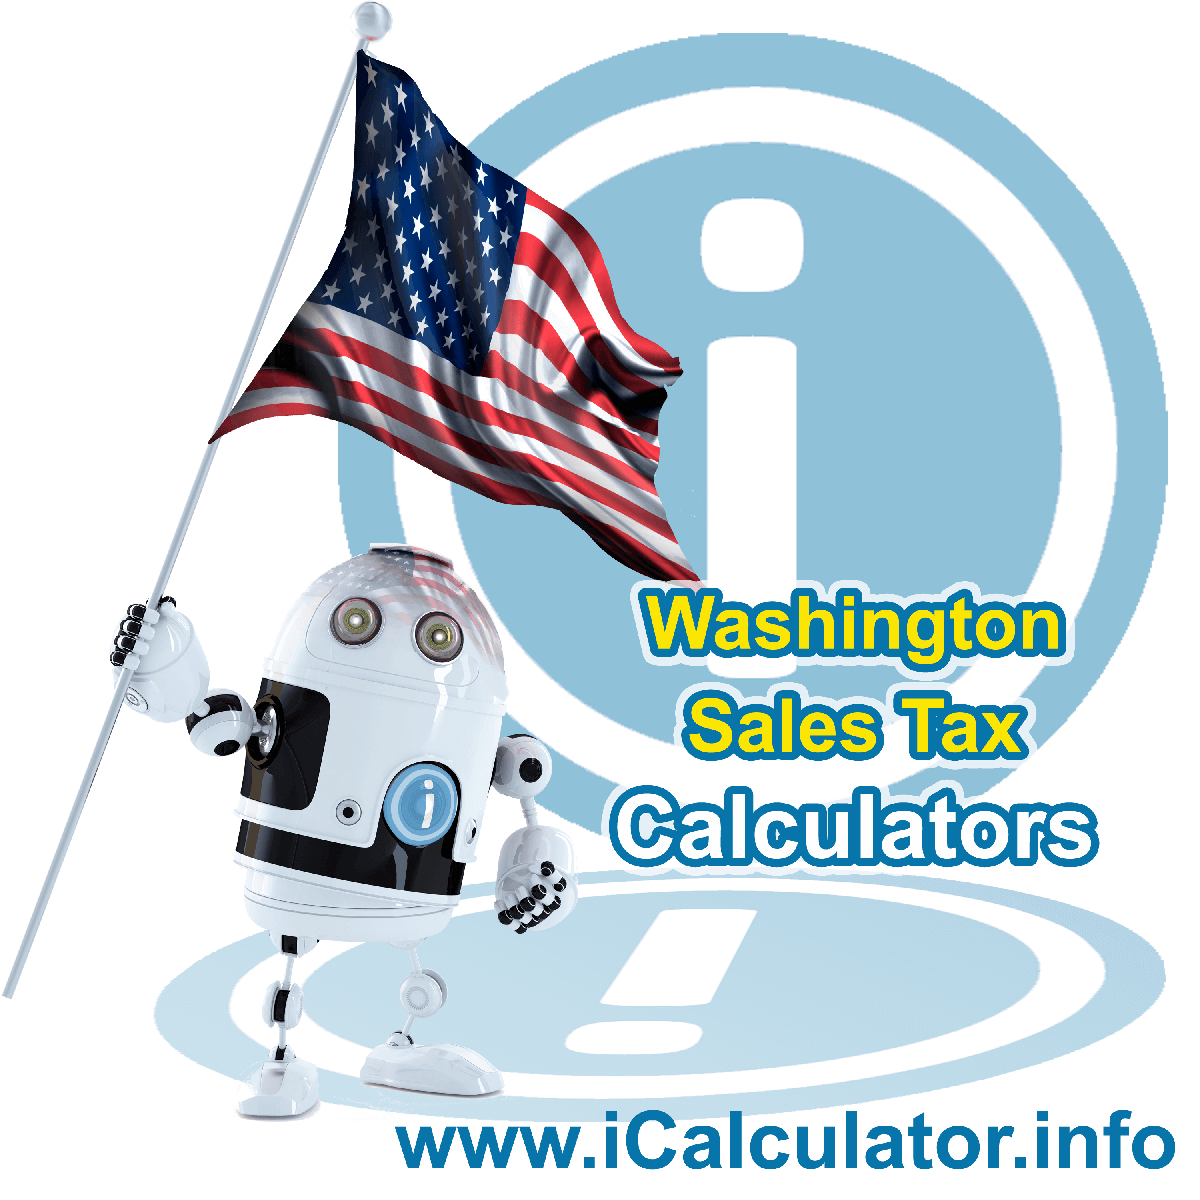 Albion Sales Rates: This image illustrates a calculator robot calculating Albion sales tax manually using the Albion Sales Tax Formula. You can use this information to calculate Albion Sales Tax manually or use the Albion Sales Tax Calculator to calculate sales tax online.